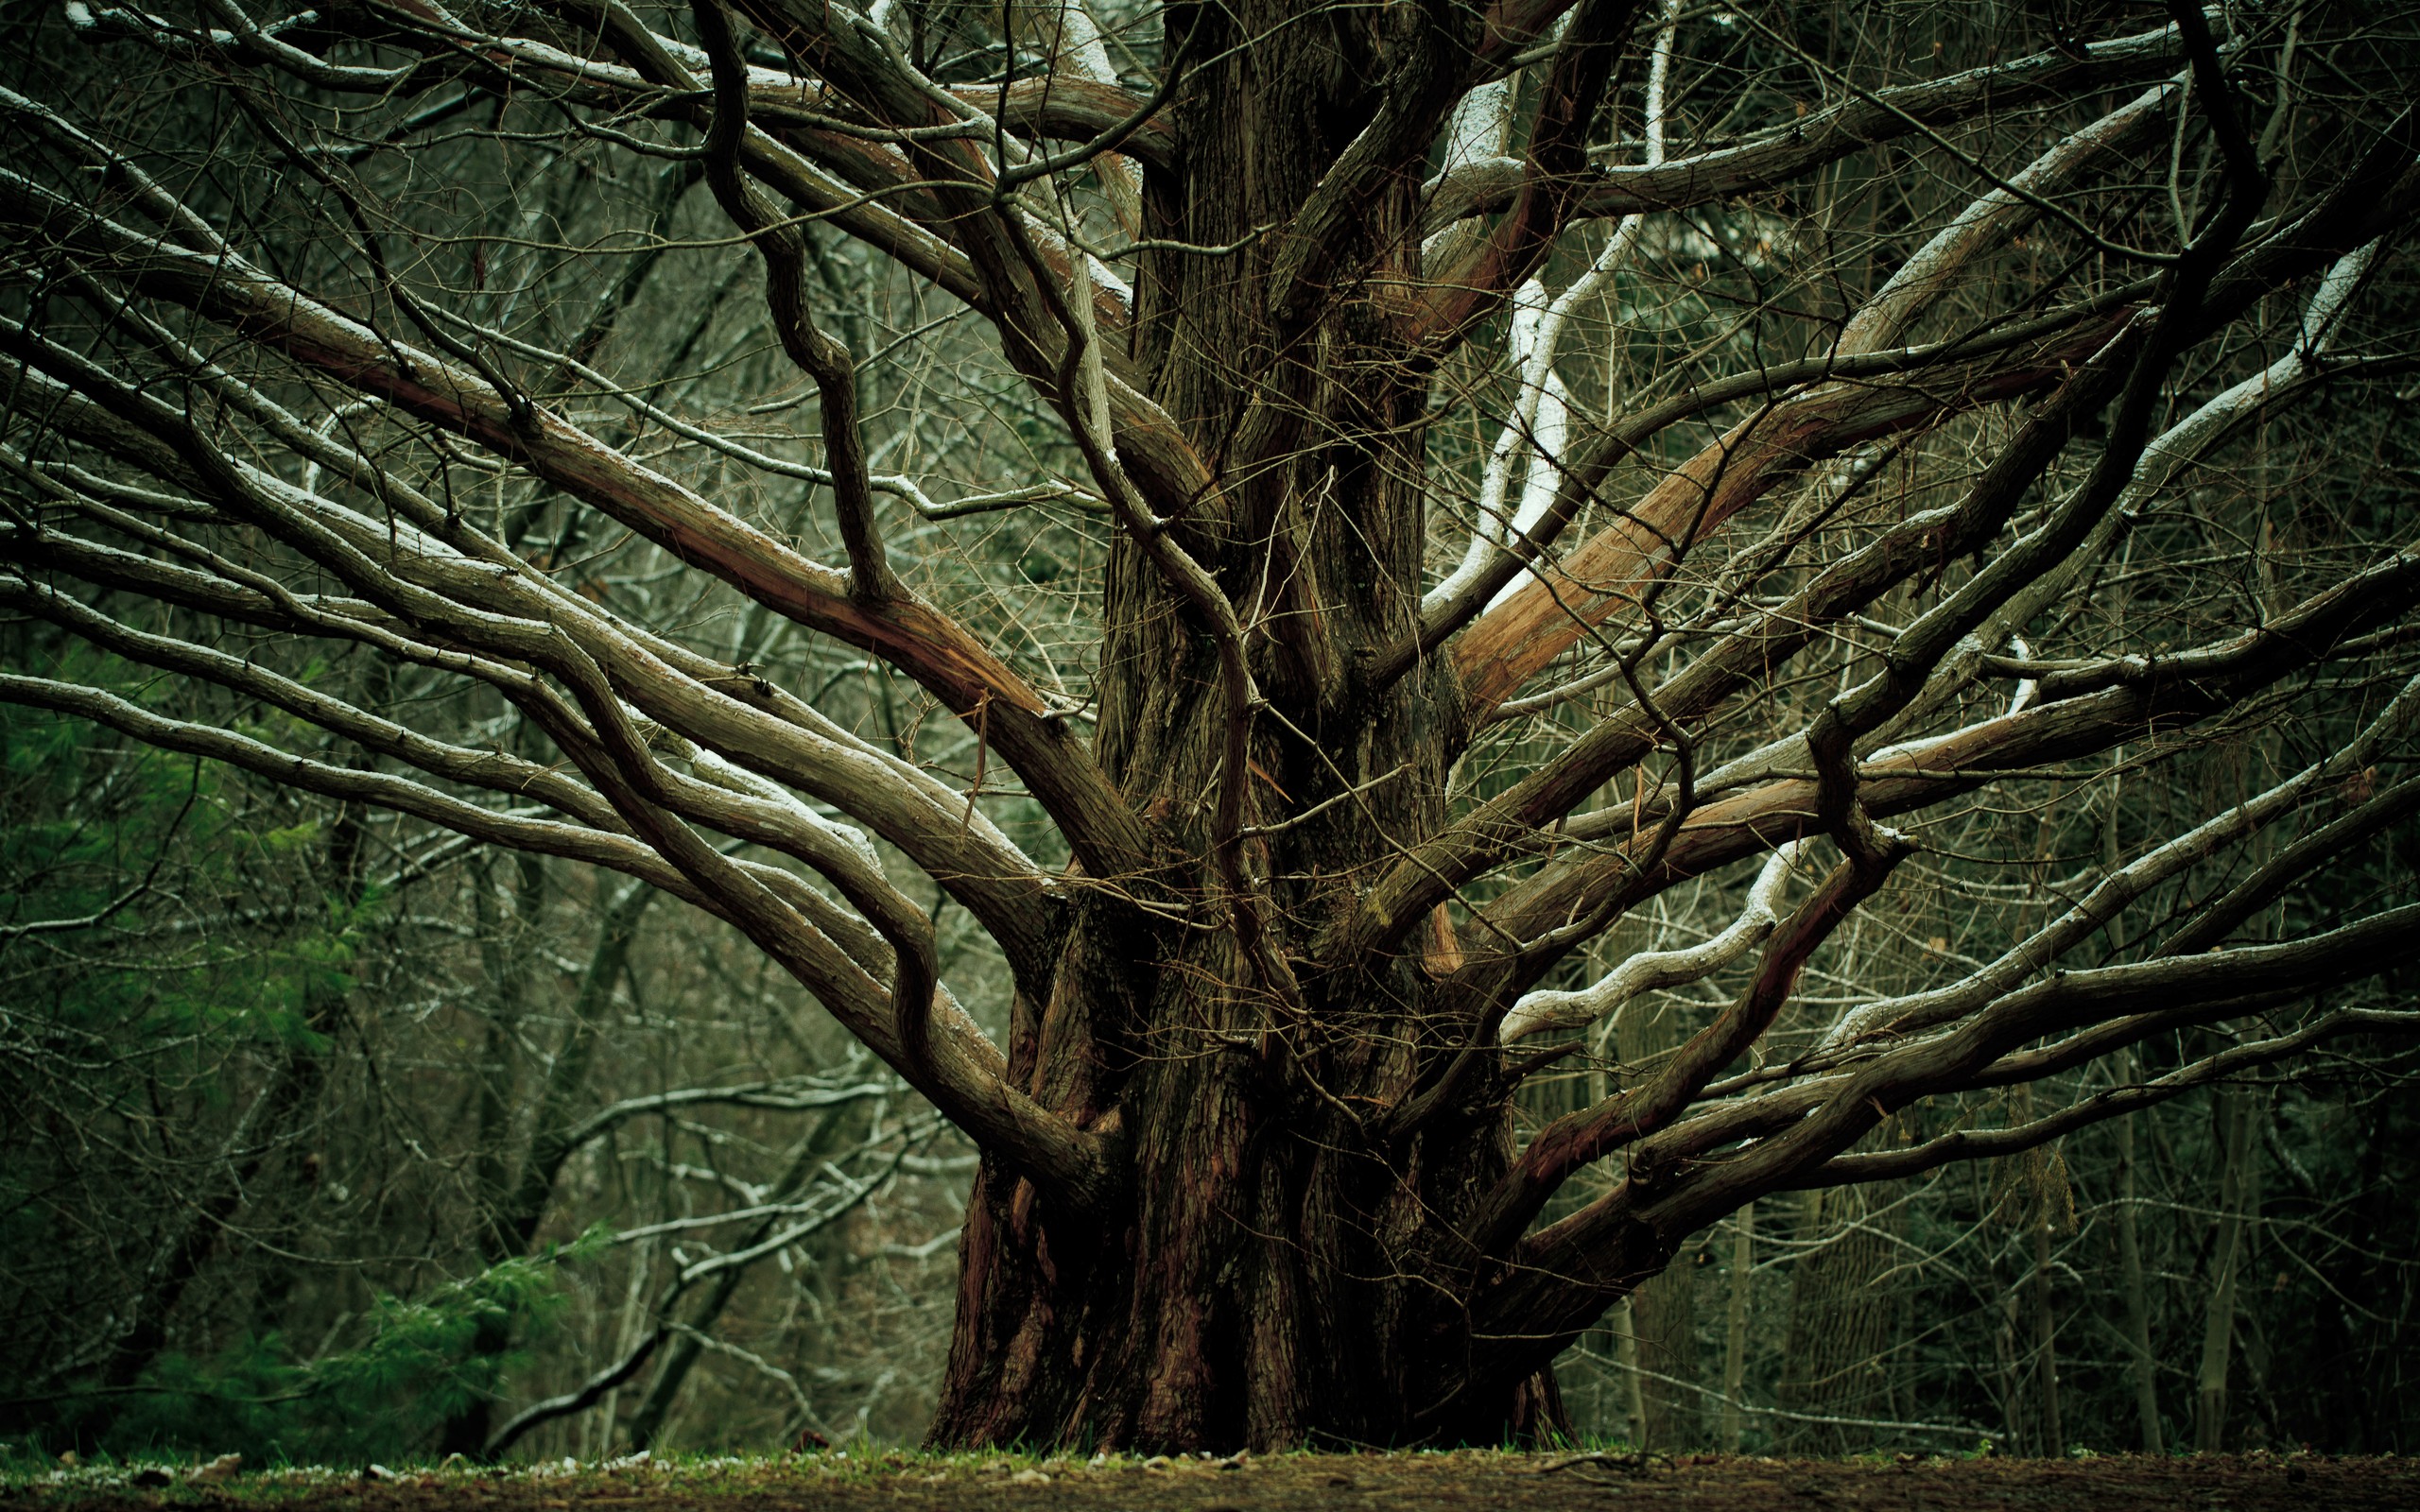 HD Wallpapers Of Trees And Branches Embracing